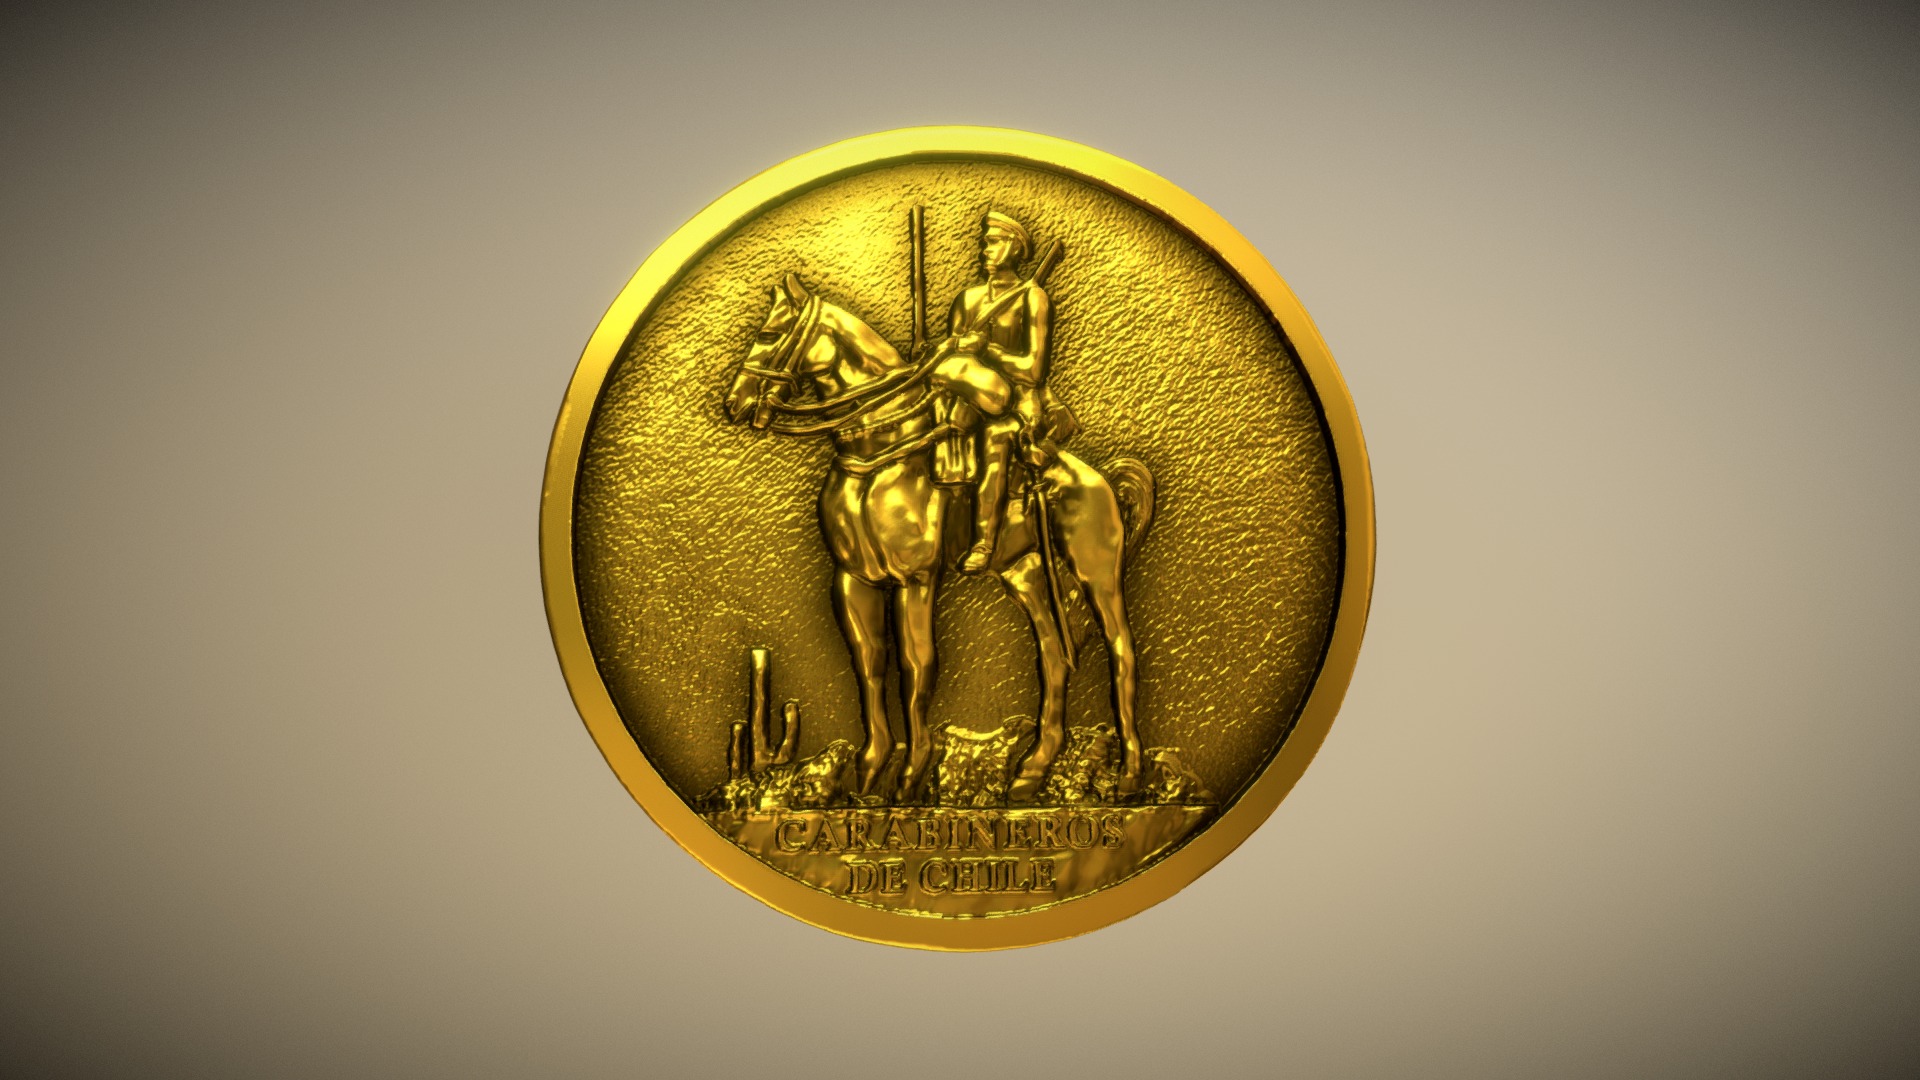 3D model My Sketchfab Mesh - This is a 3D model of the My Sketchfab Mesh. The 3D model is about a gold coin with a person riding a horse.